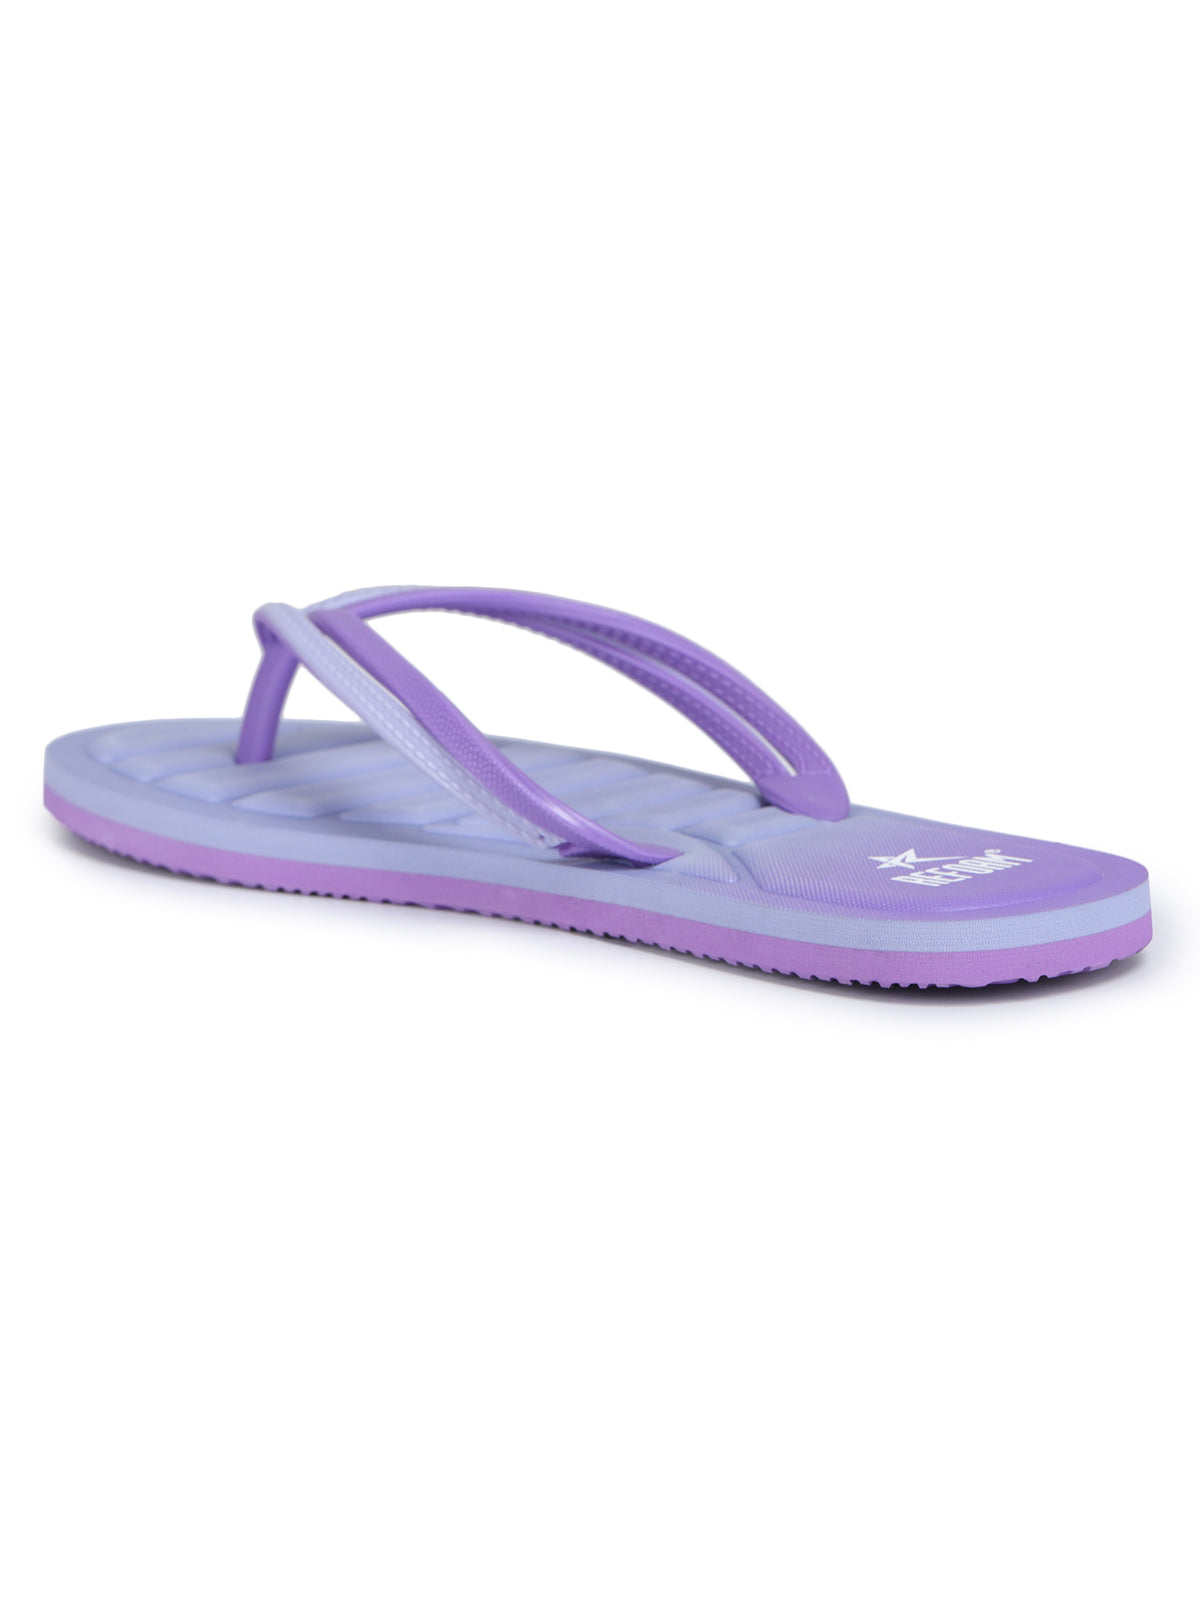 Purple Solid Rubber Slip On Casual Slippers For Women